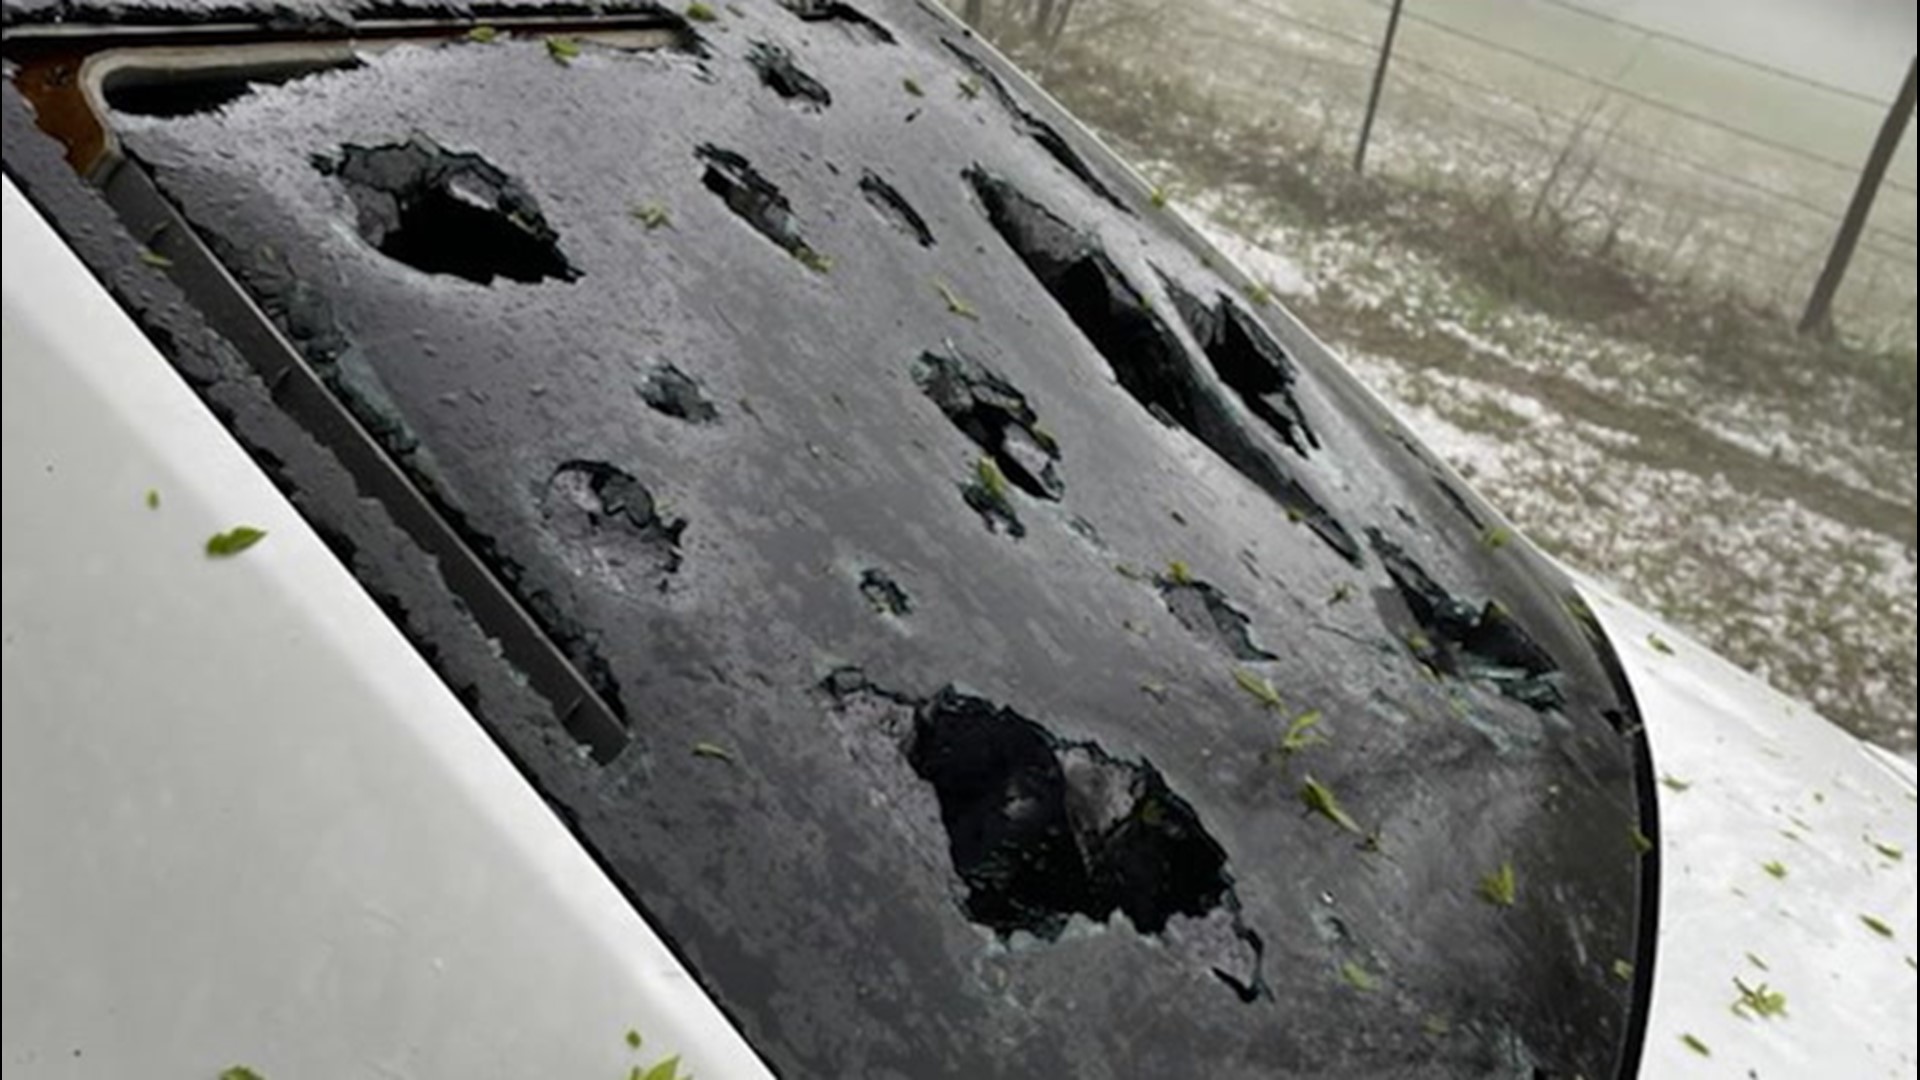 State Farm paid more than $3 billion in insurance claims for hail damage in 2020. Agents say preparation before storms can save you time and money.